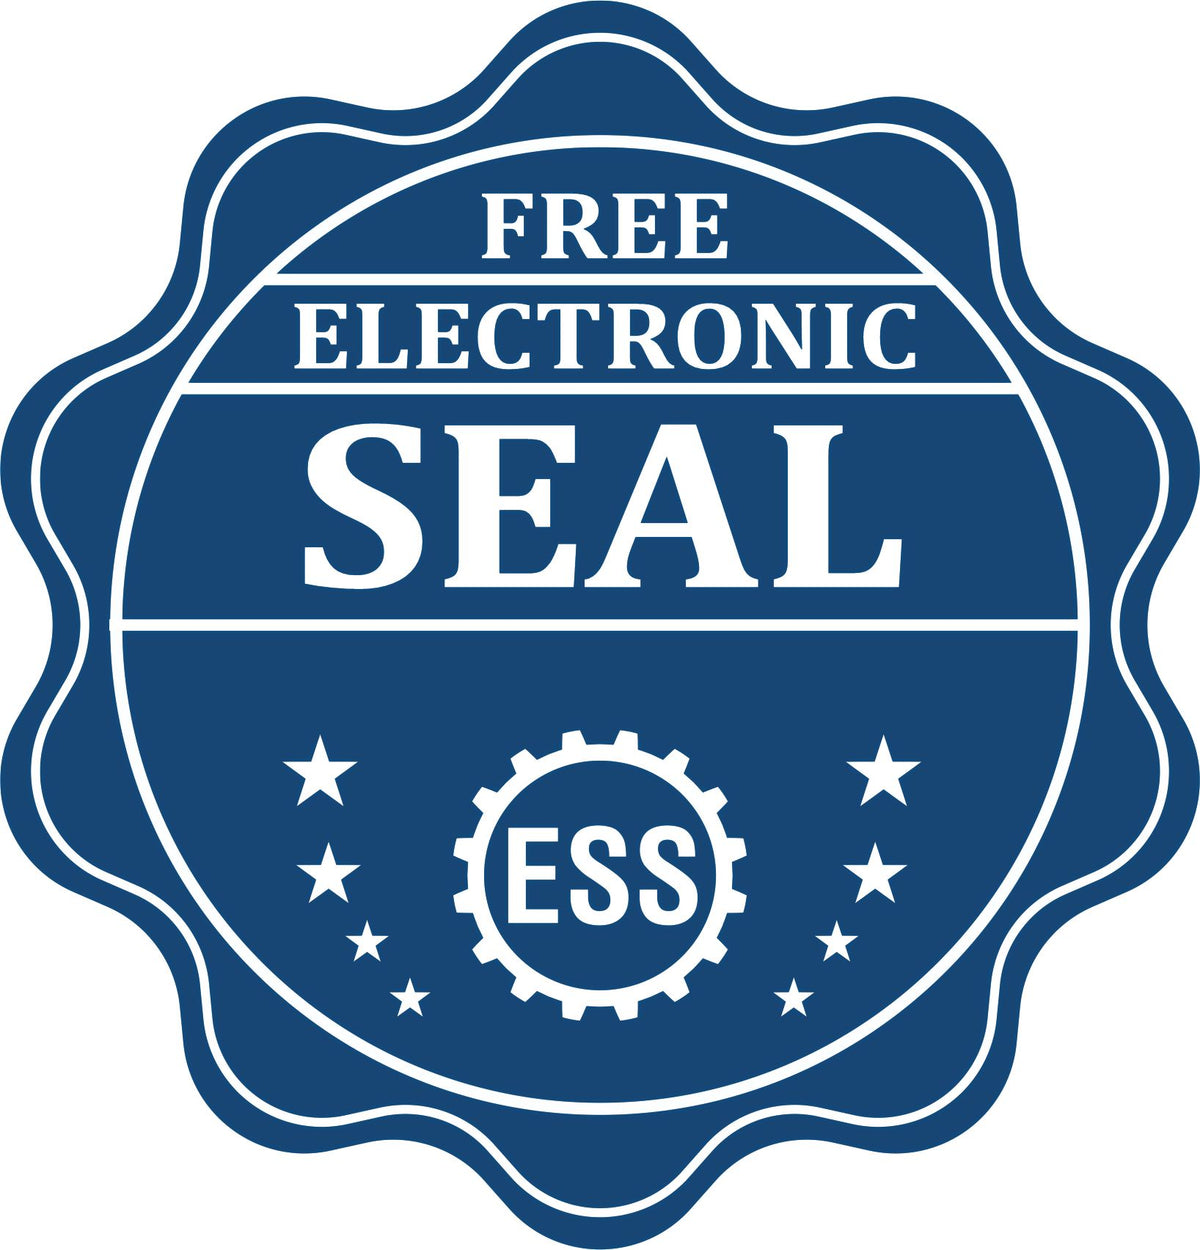 A badge showing a free electronic seal for the Slim Pre-Inked Virginia Land Surveyor Seal Stamp with stars and the ESS gear on the emblem.